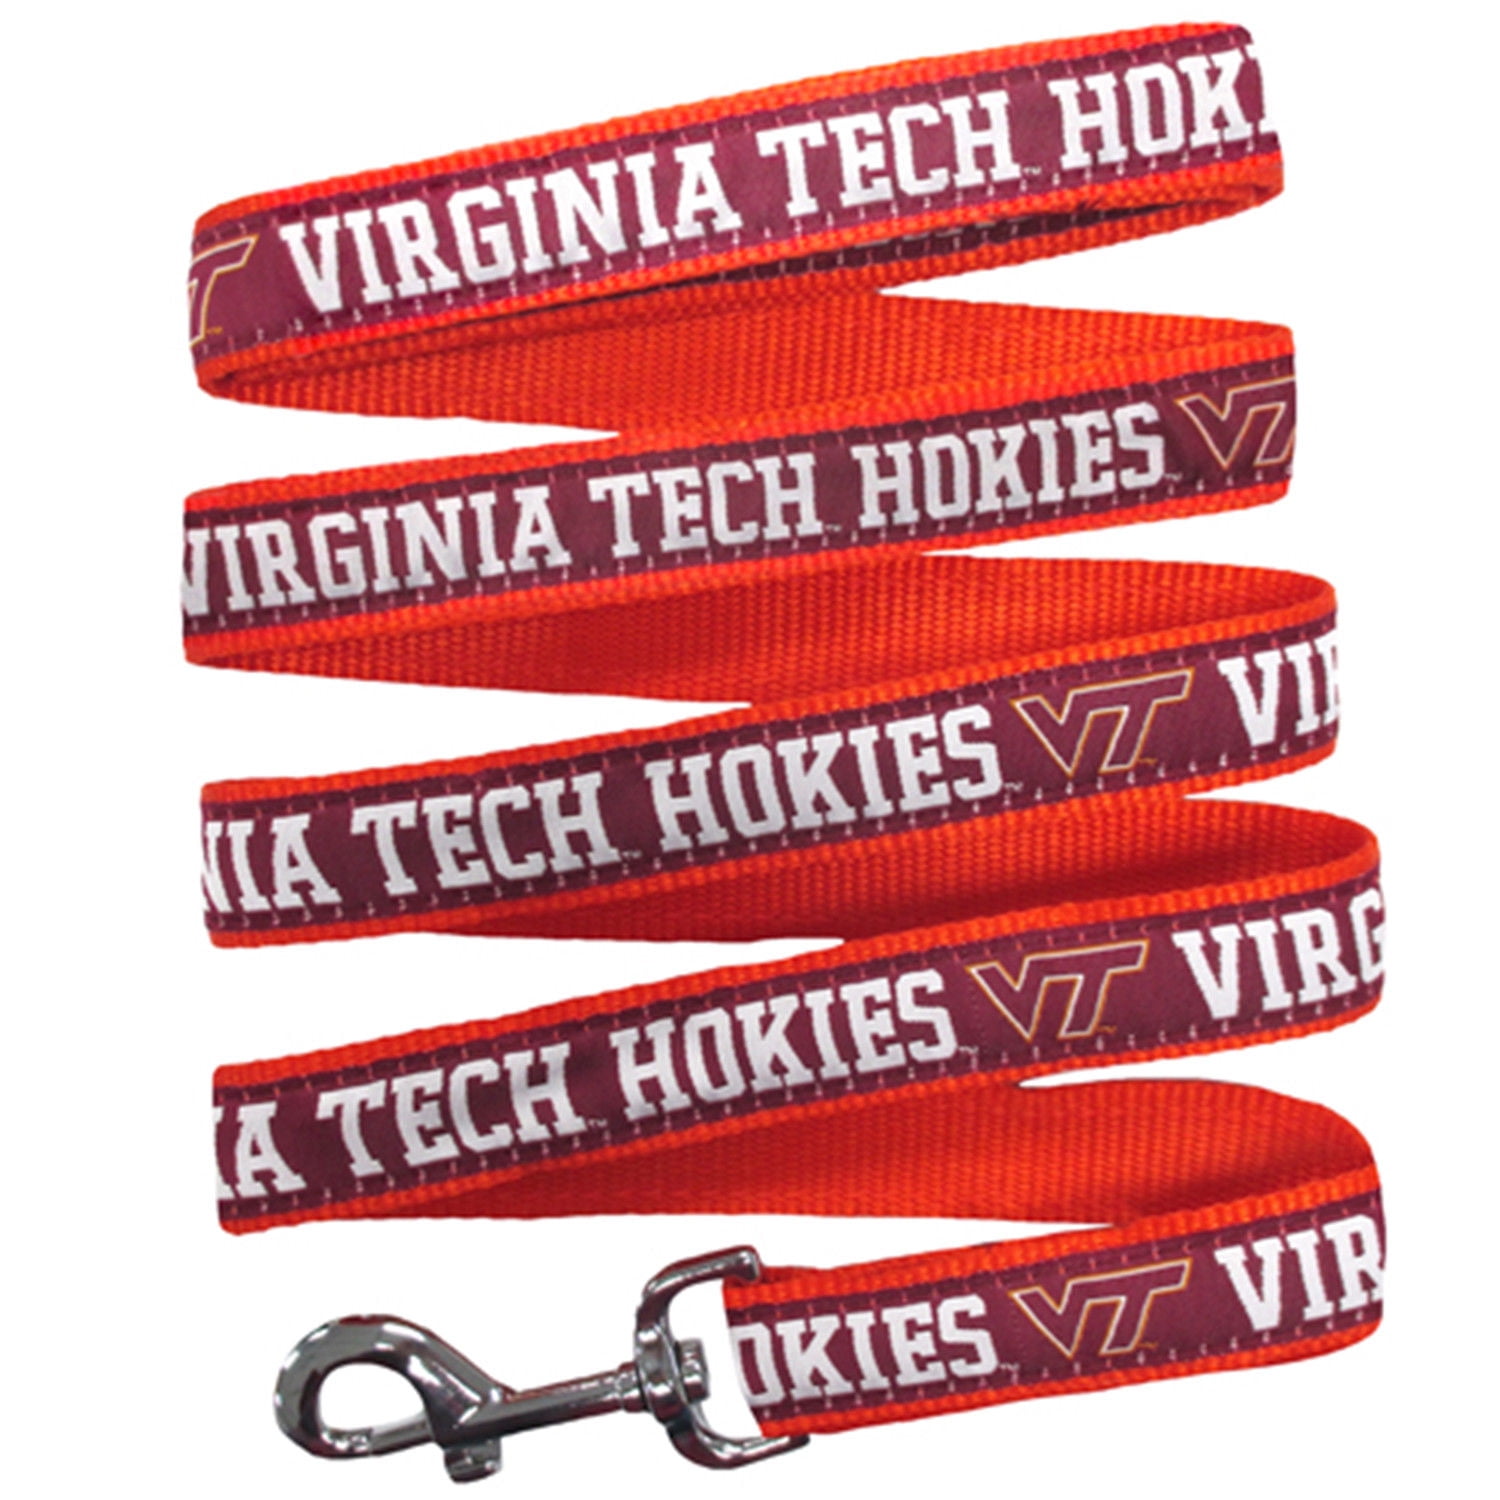 Football/Basketball leashes for DOGS & CATS - Durable SPORTS PET LEASH available in 24 SCHOOL TEAMS COLLEGE PET LEASH NCAA DOG LEASH COLLEGIATE DOG LEASH 